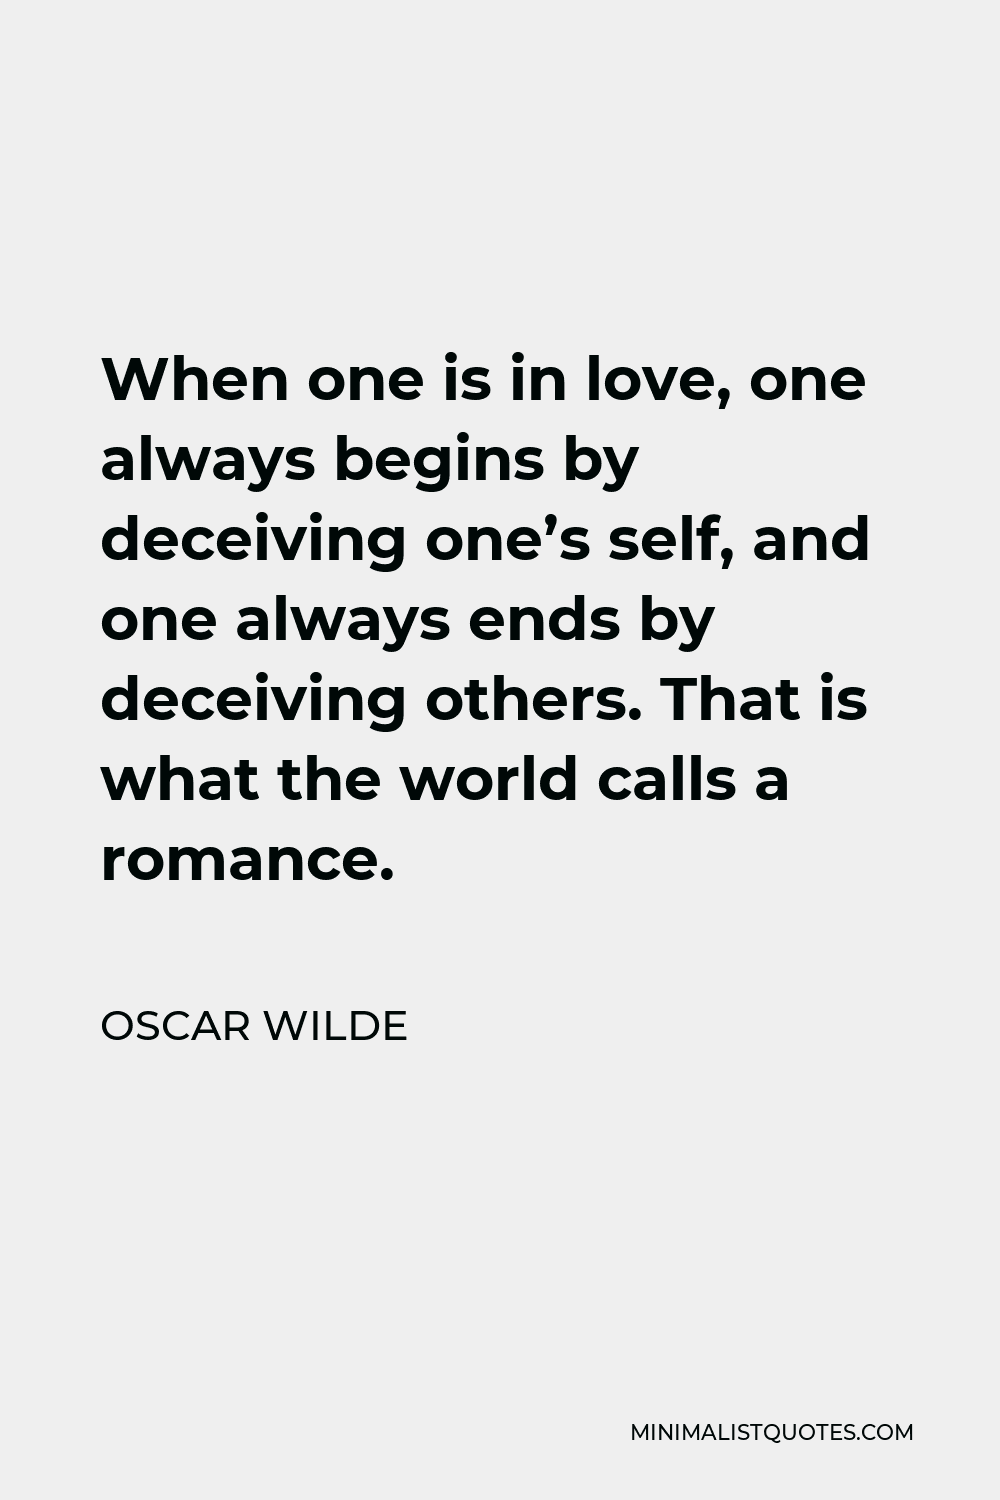 Oscar Wilde Quote - When one is in love, one always begins by deceiving one’s self, and one always ends by deceiving others. That is what the world calls a romance.